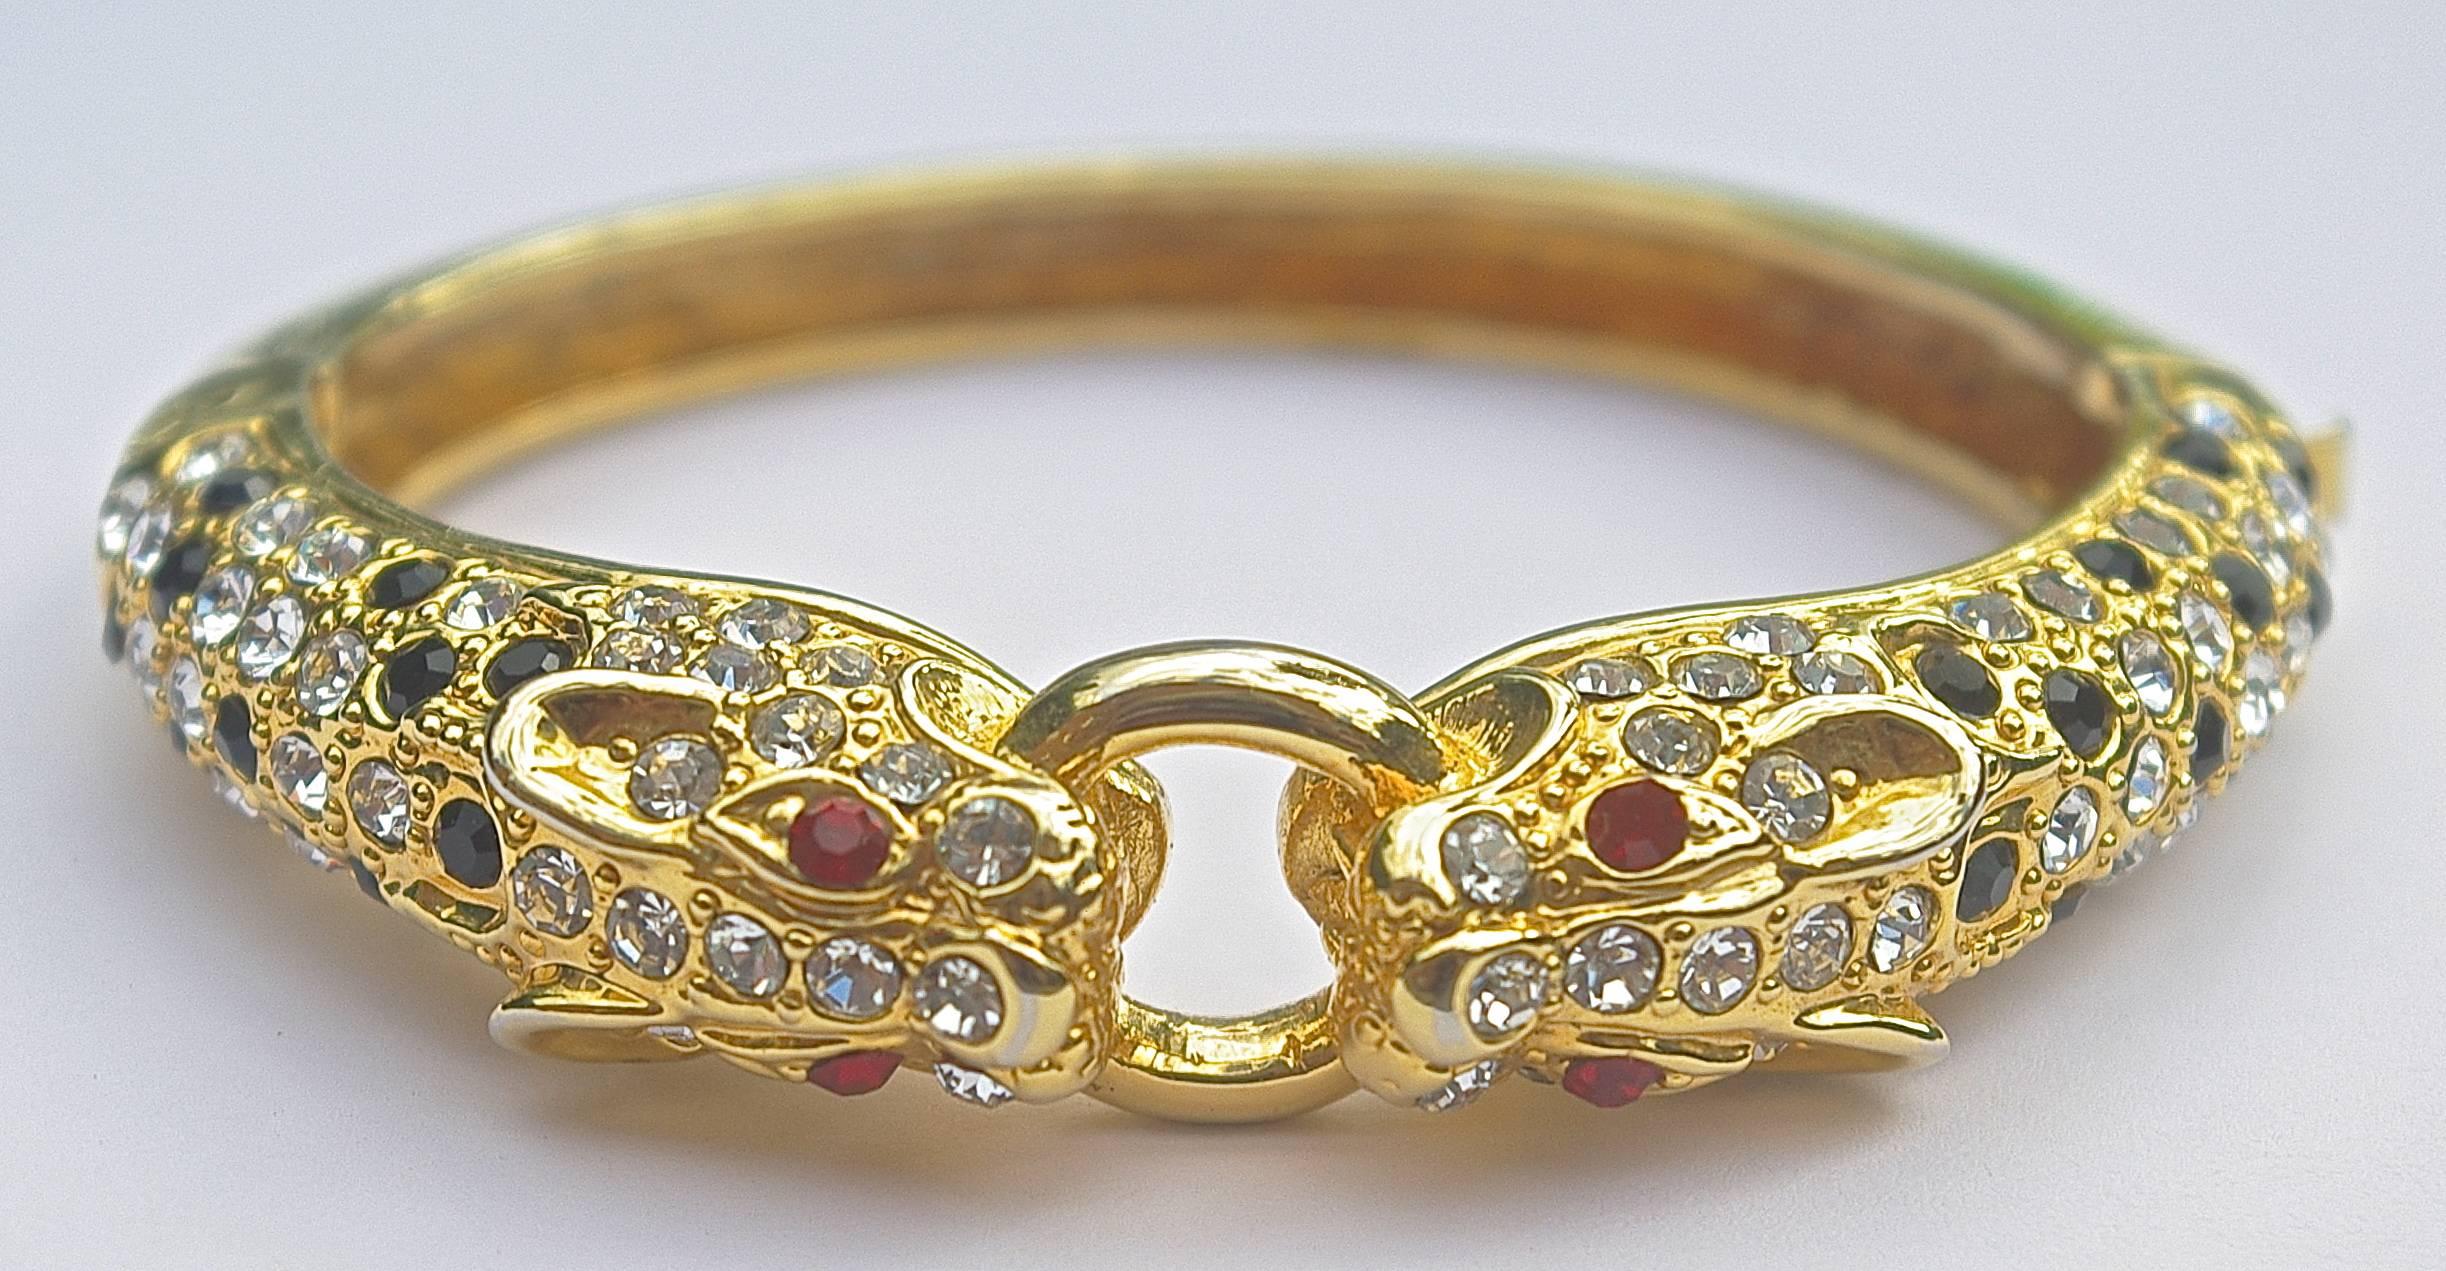 Gold plated leopard bangle featuring black and clear rhinestones and ruby red eyes. Measuring approximately width 6.7cm / 2.64 inches.  Circa 1980s.

This fabulous vintage statement bangle bracelet would bring style and glamour to any outfit.